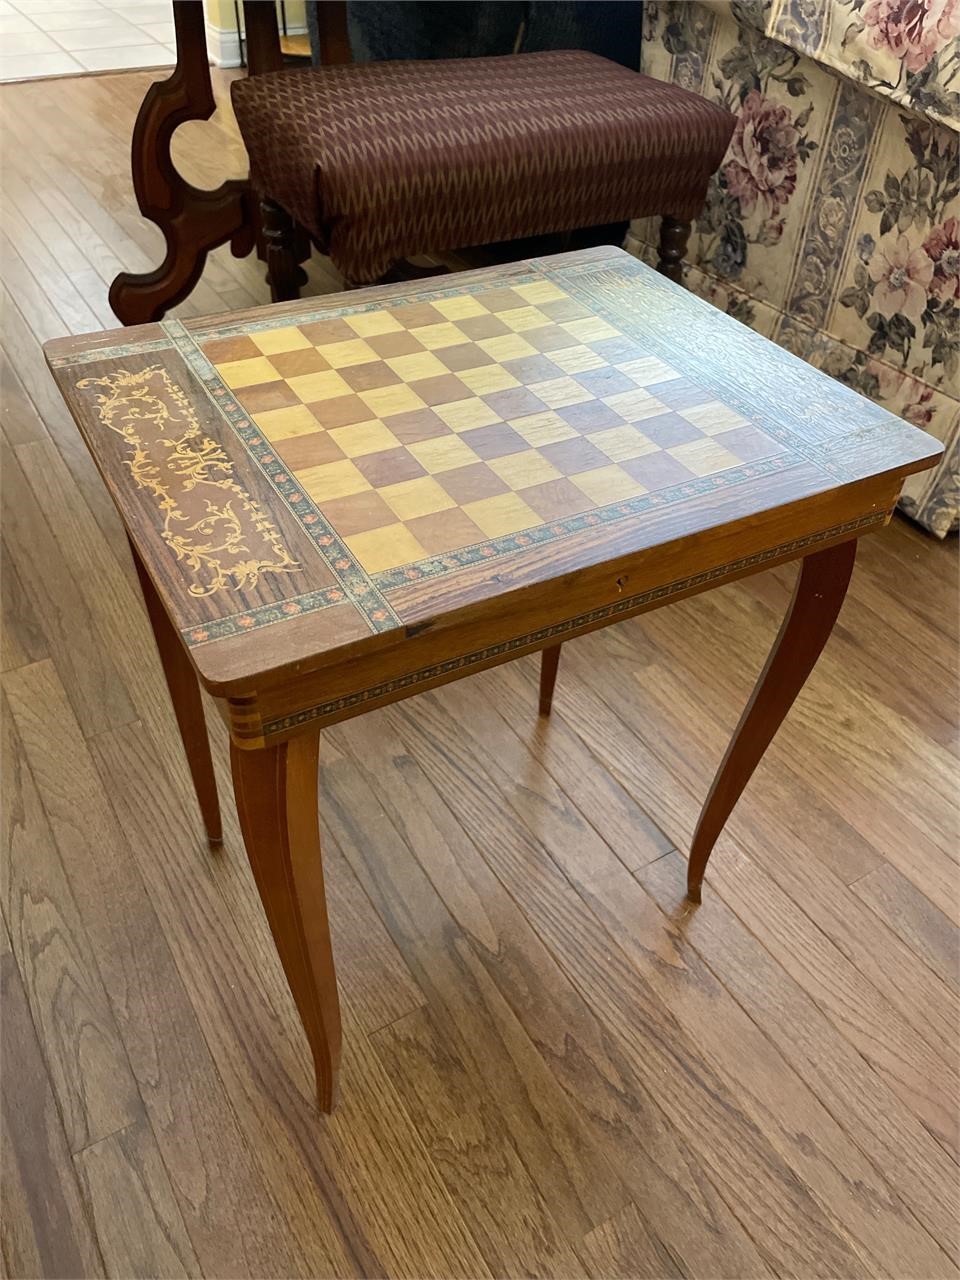 Small antique game table